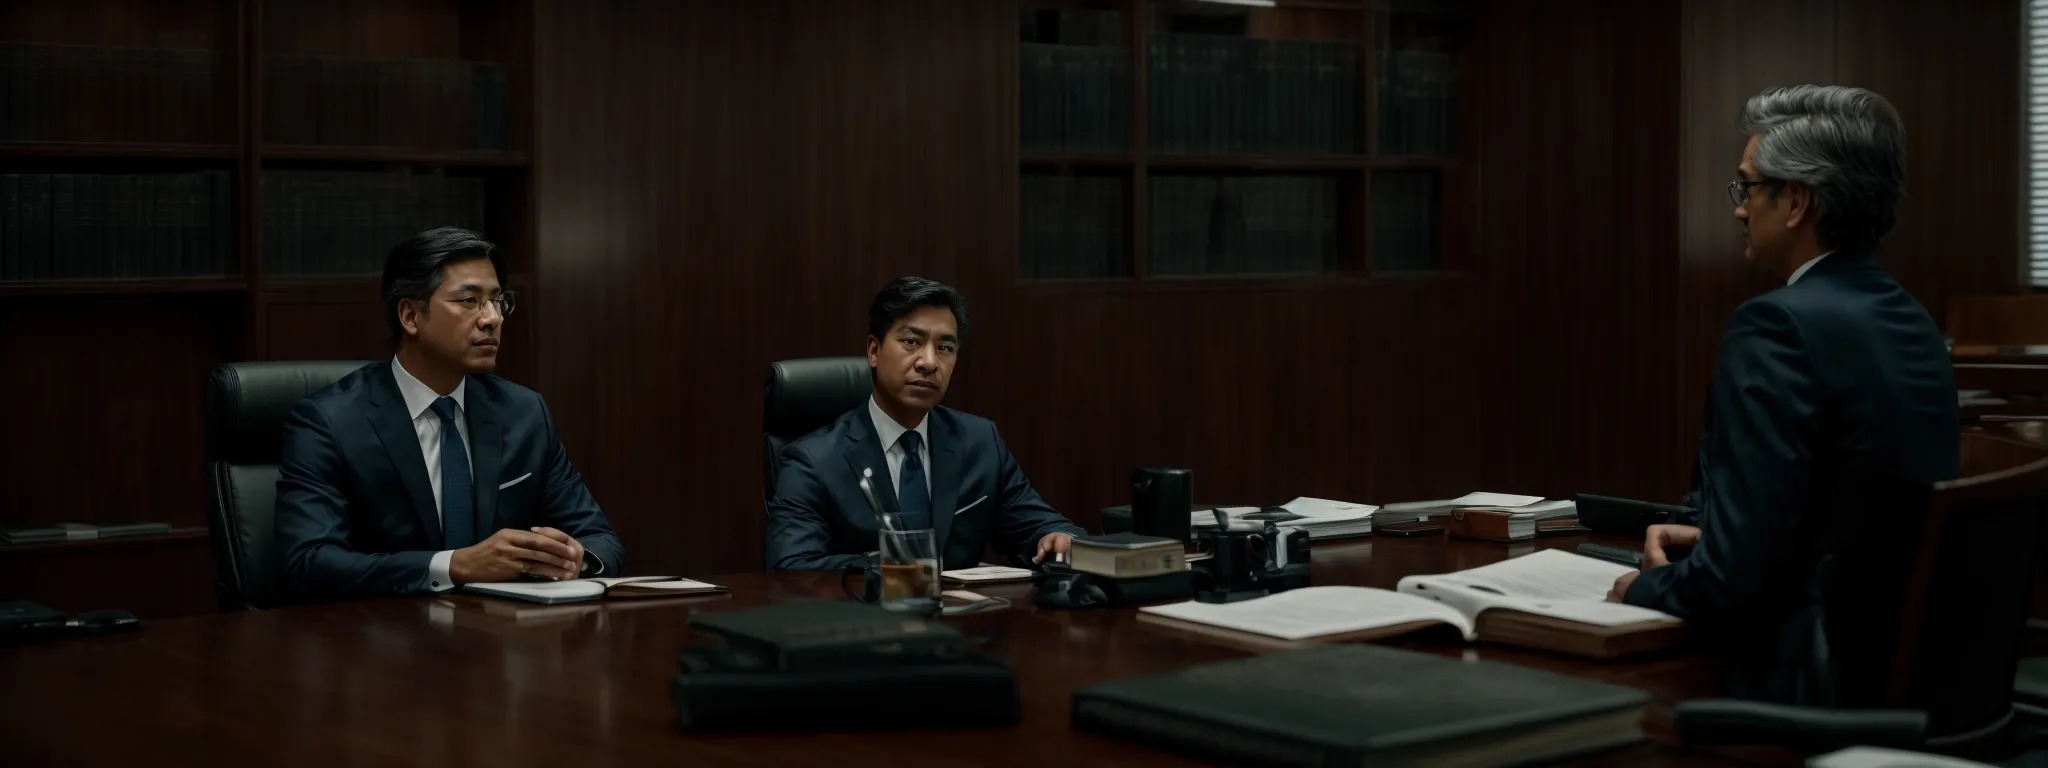 two attorneys strategize over a conference table with a focused intensity, surrounded by legal books and case files.